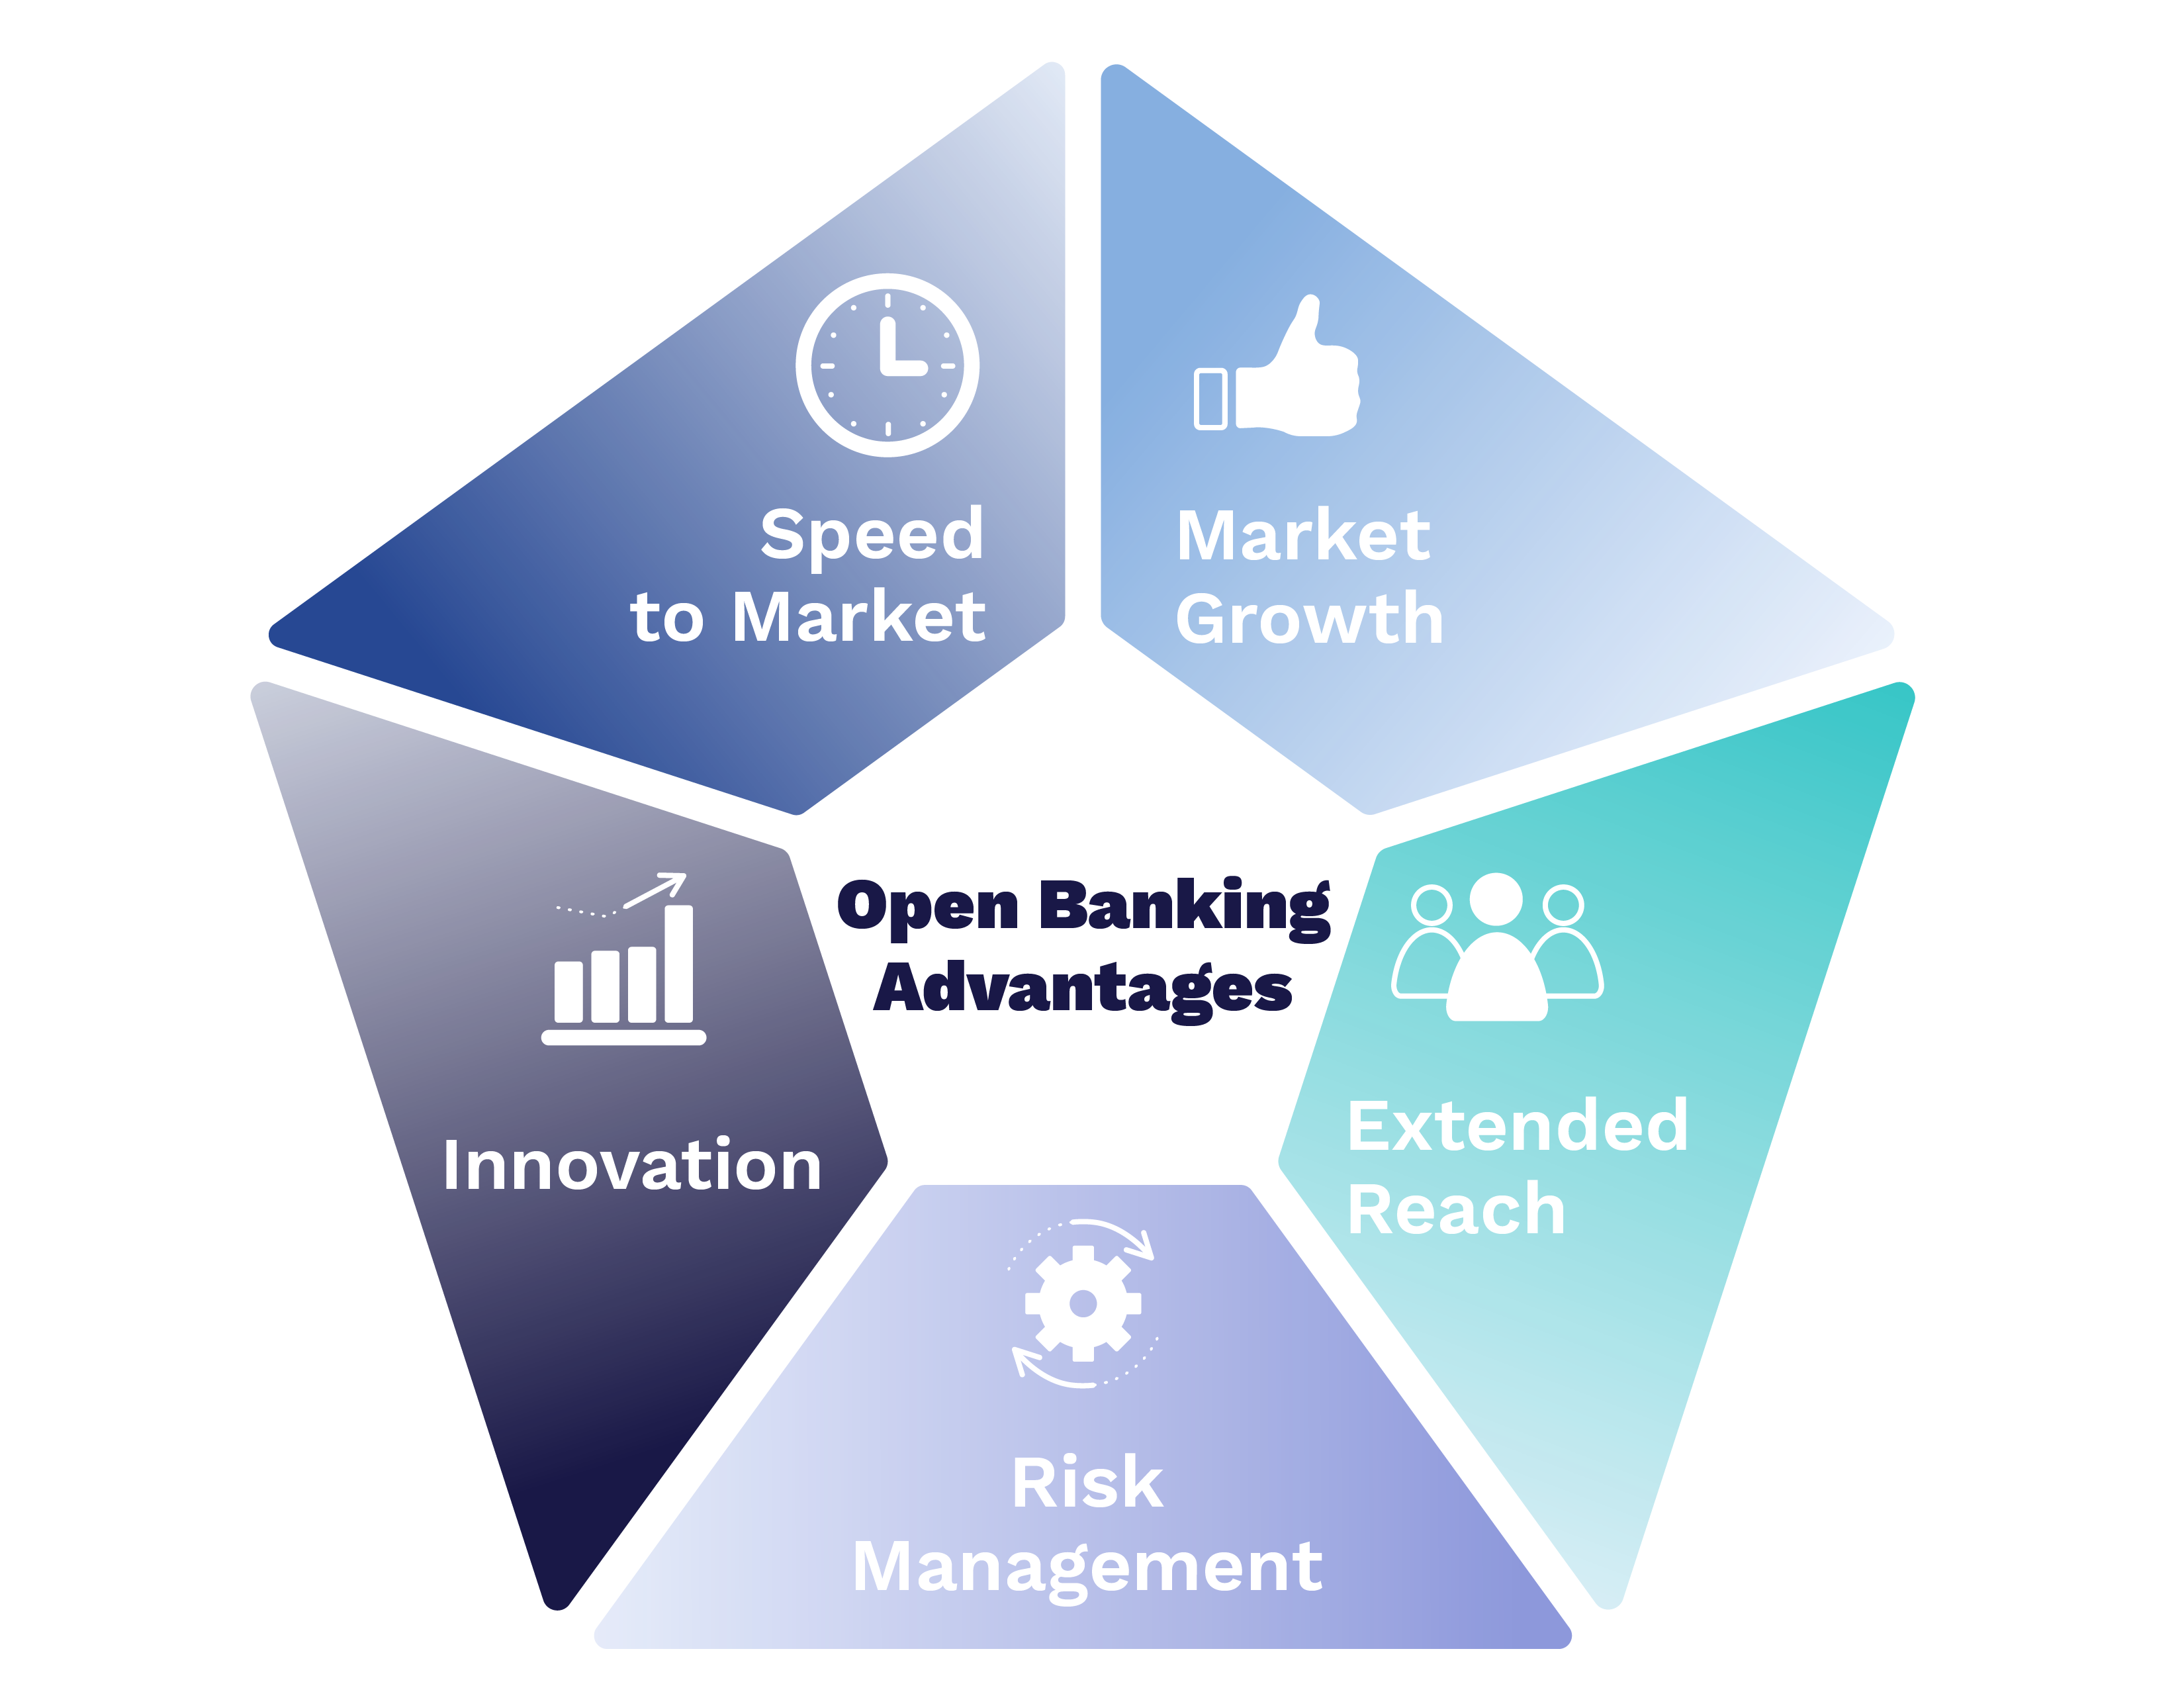 Open Banking Advantages include speed to market, market growth, extended reach, risk management and innovation. 